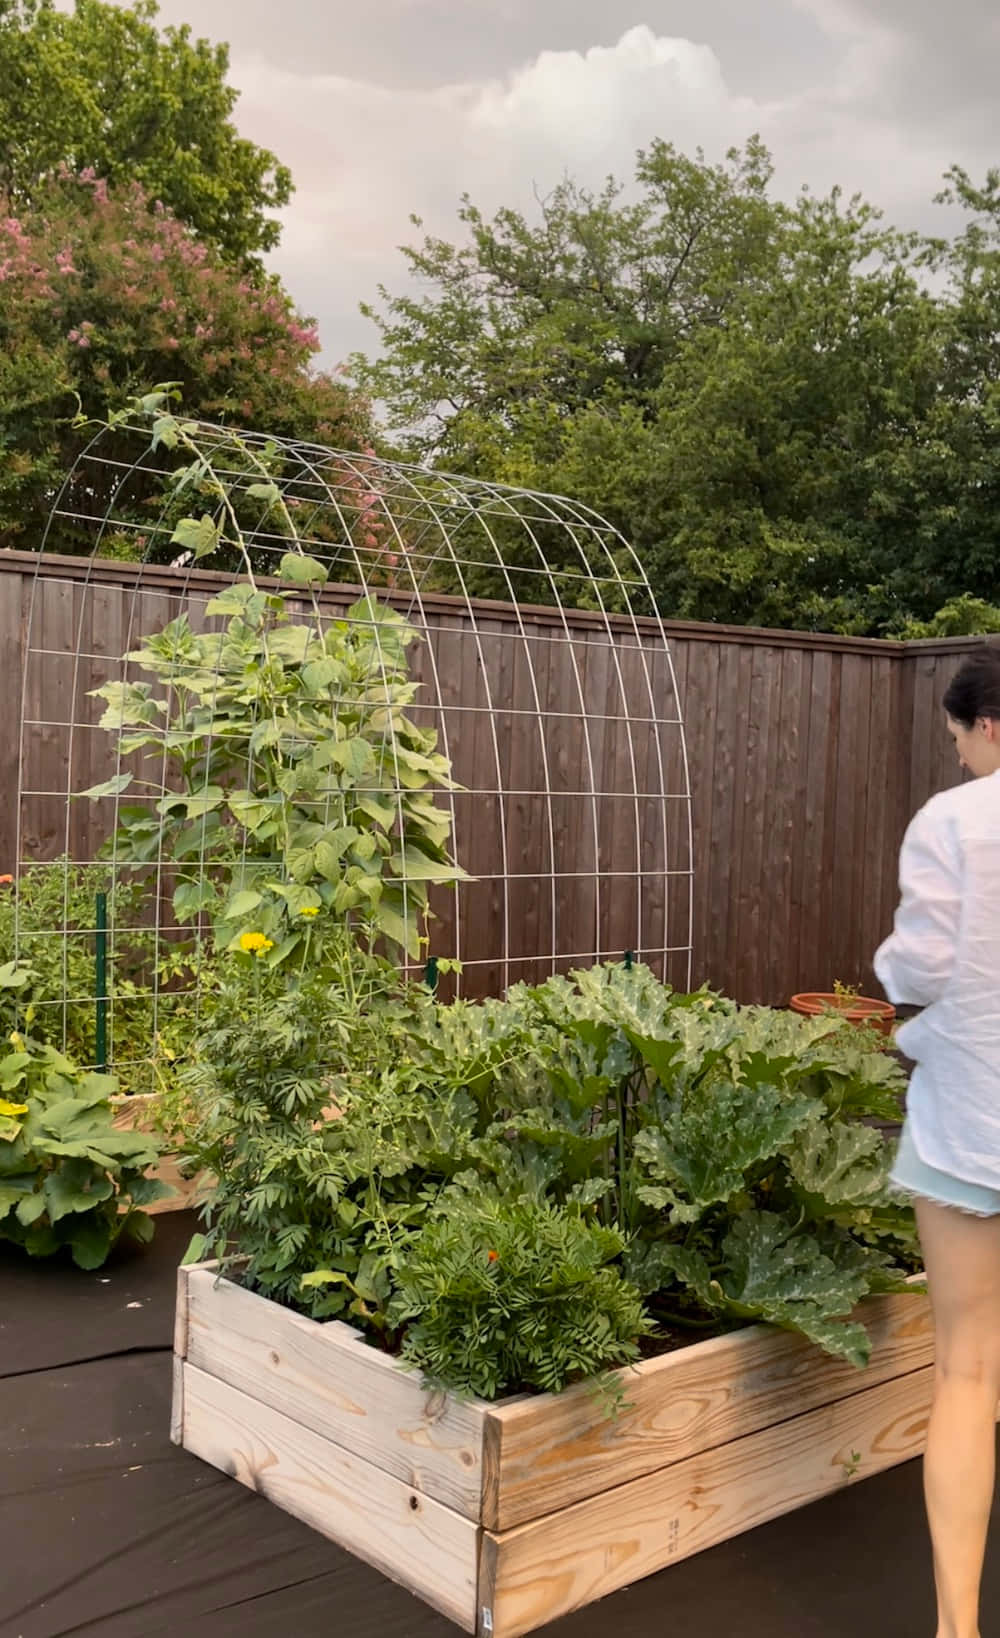 A Woman Is Standing In A Raised Garden Bed